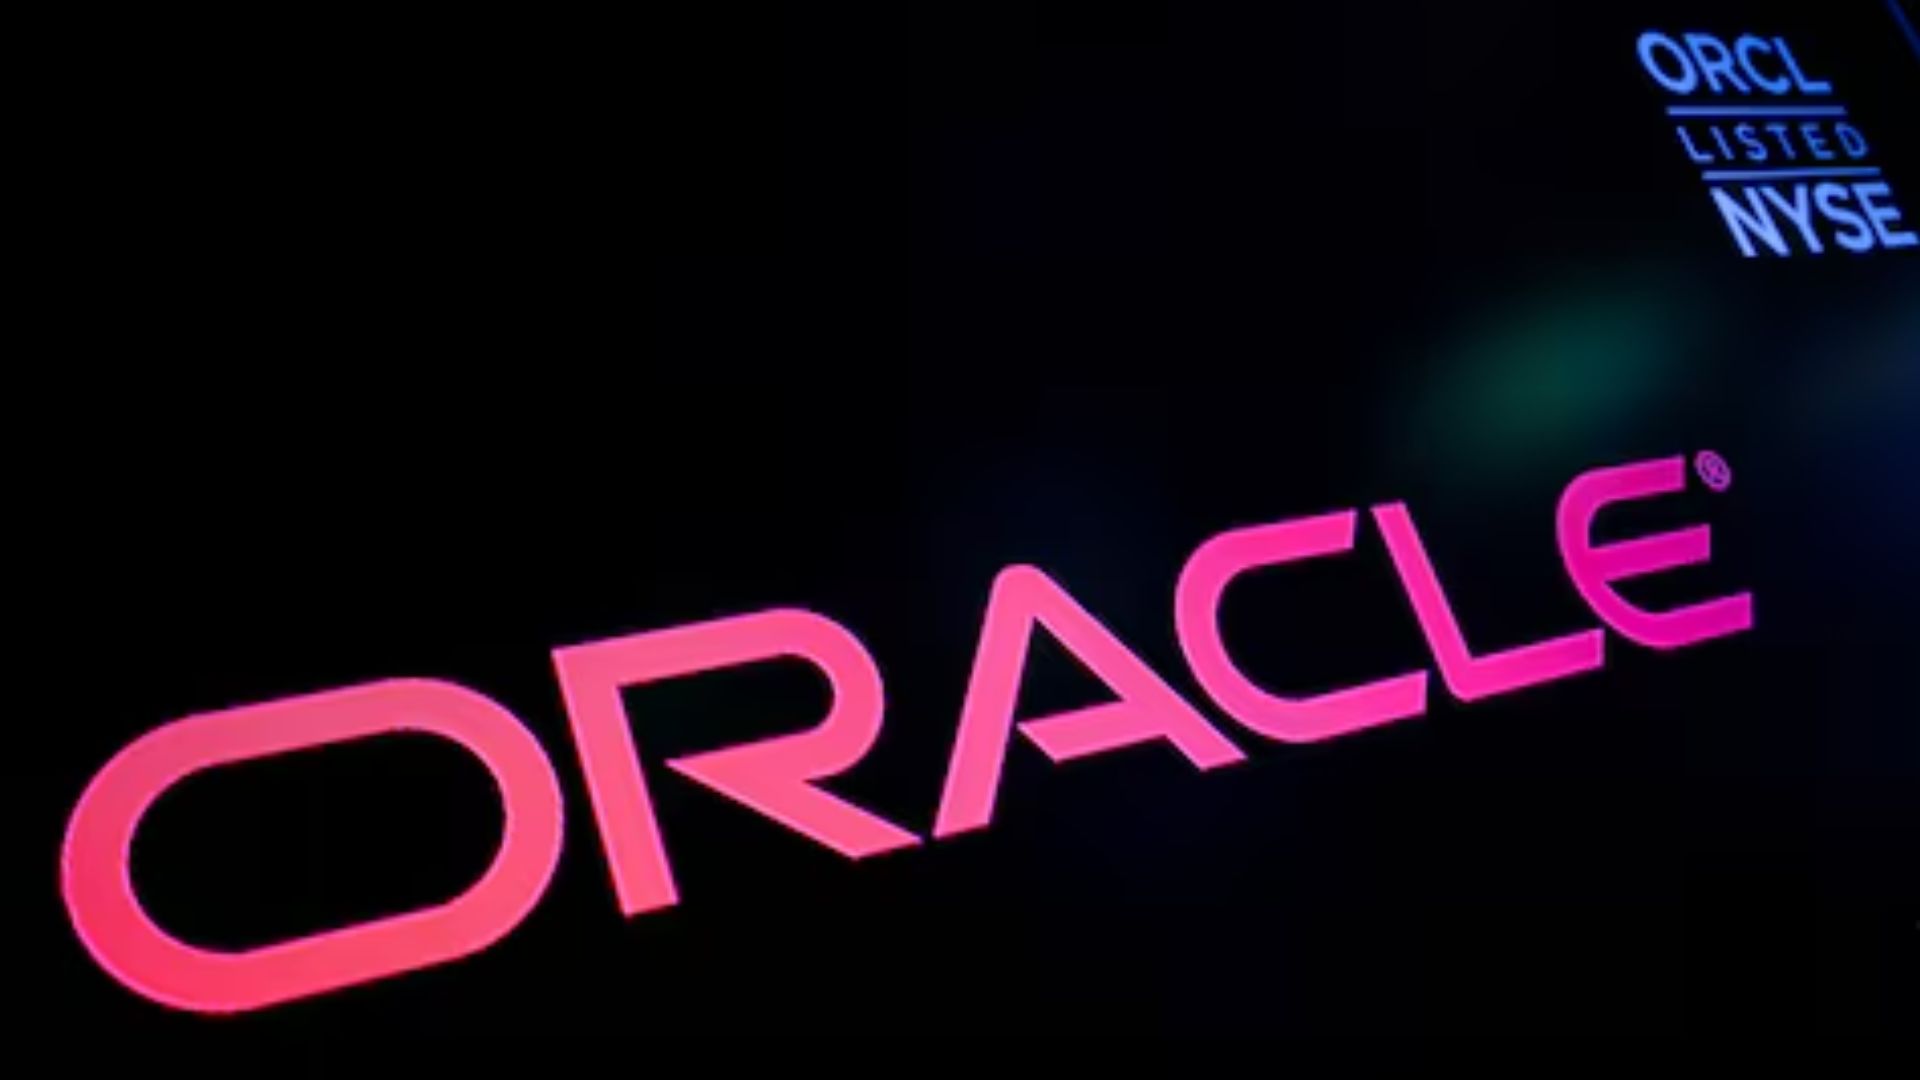 Oracle expects double-digit revenue growth for fiscal 2025 on strong AI demand